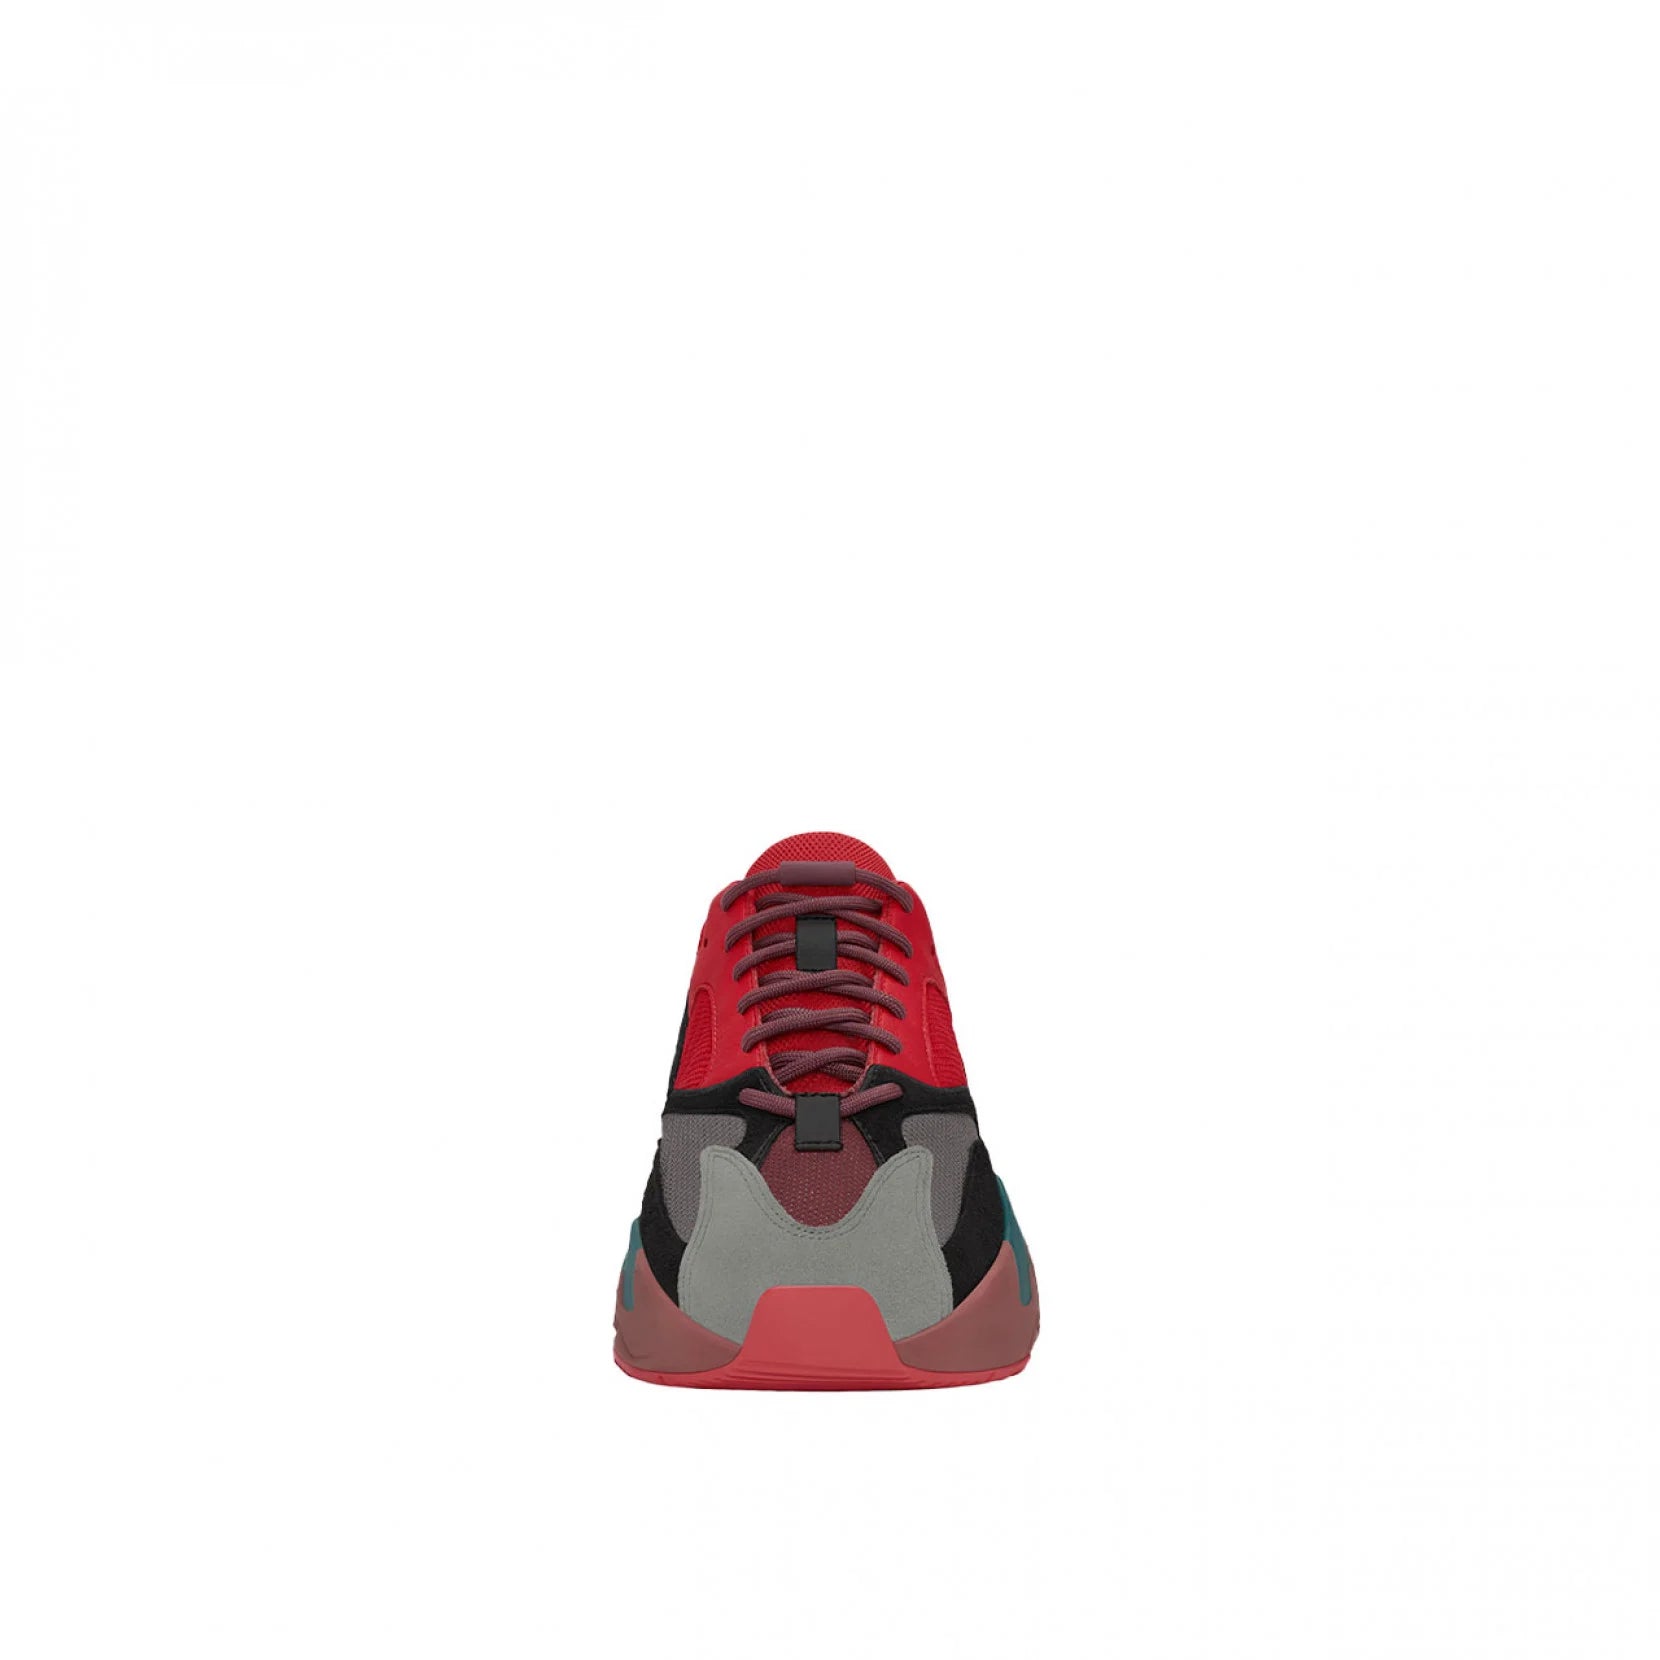 YEEZY BOOST 700 HI-RES ROT 